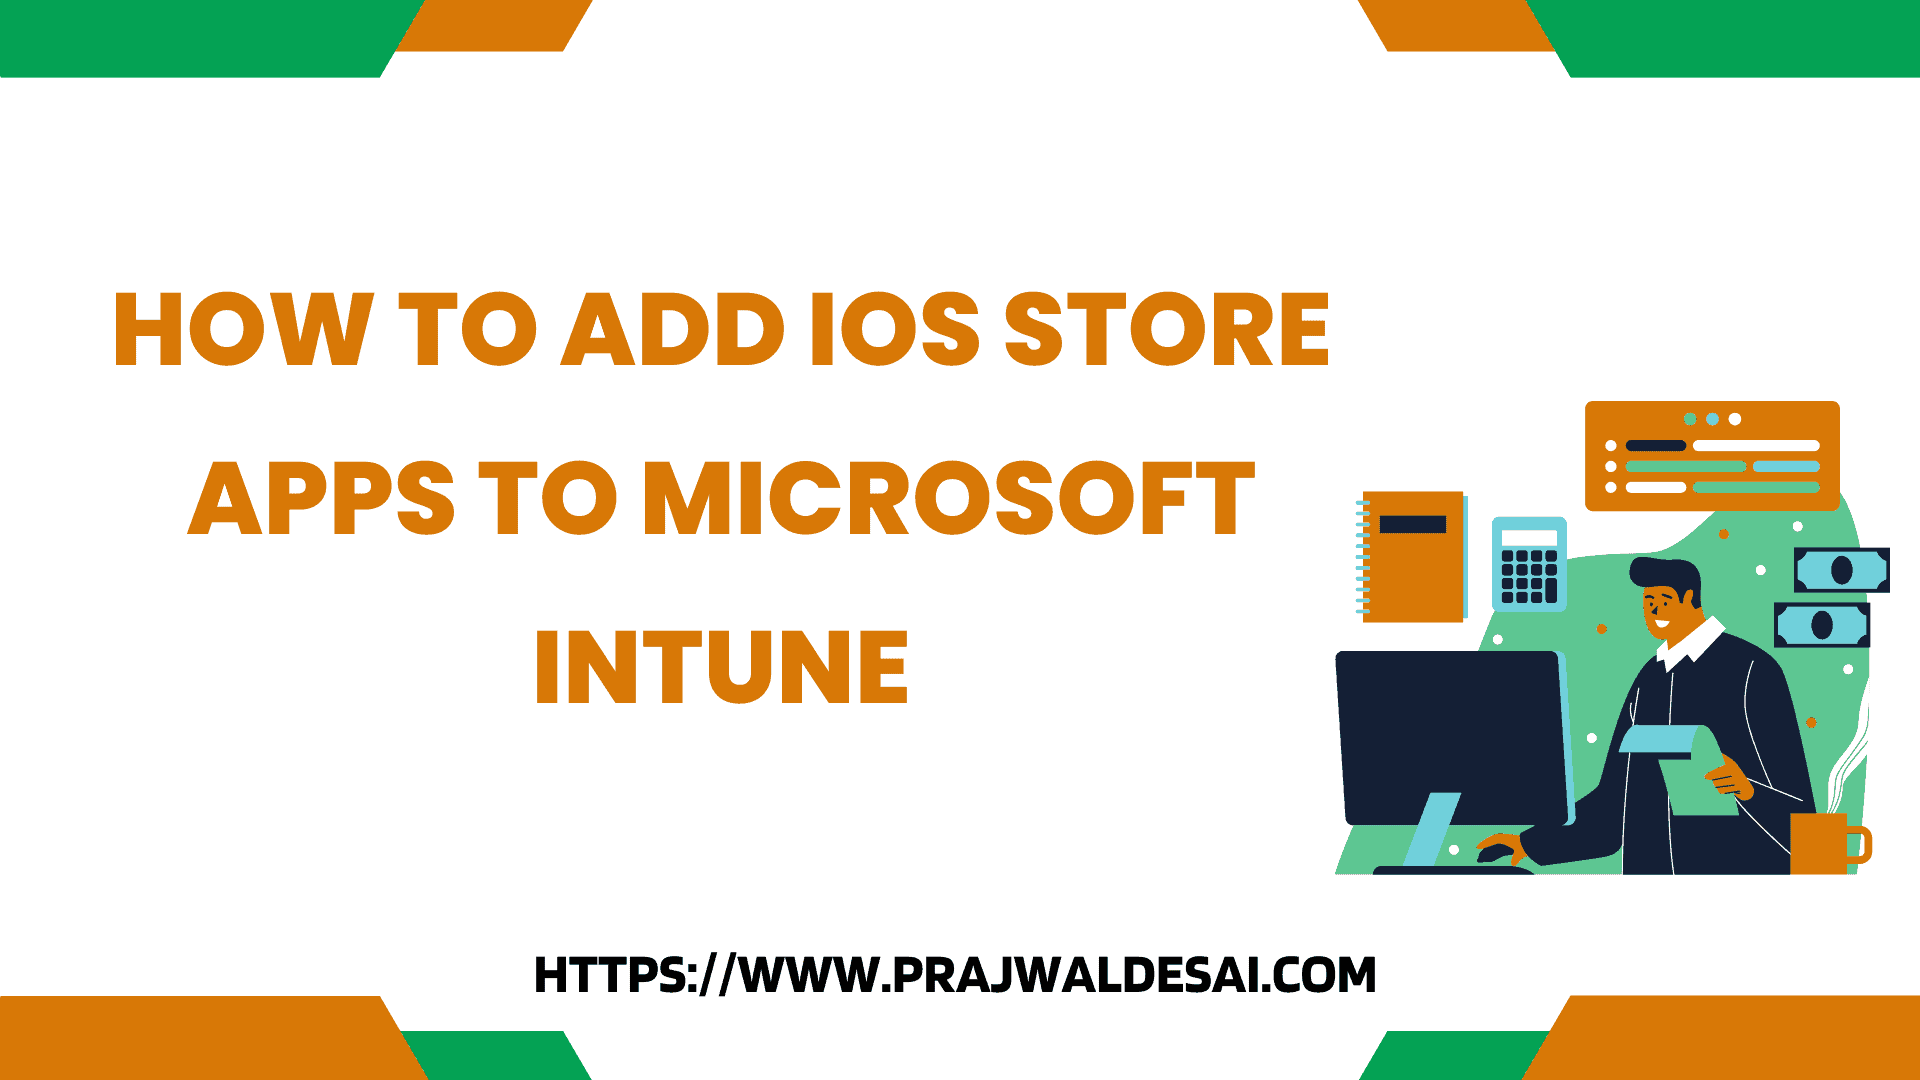 How to Add iOS Store Apps to Microsoft Intune